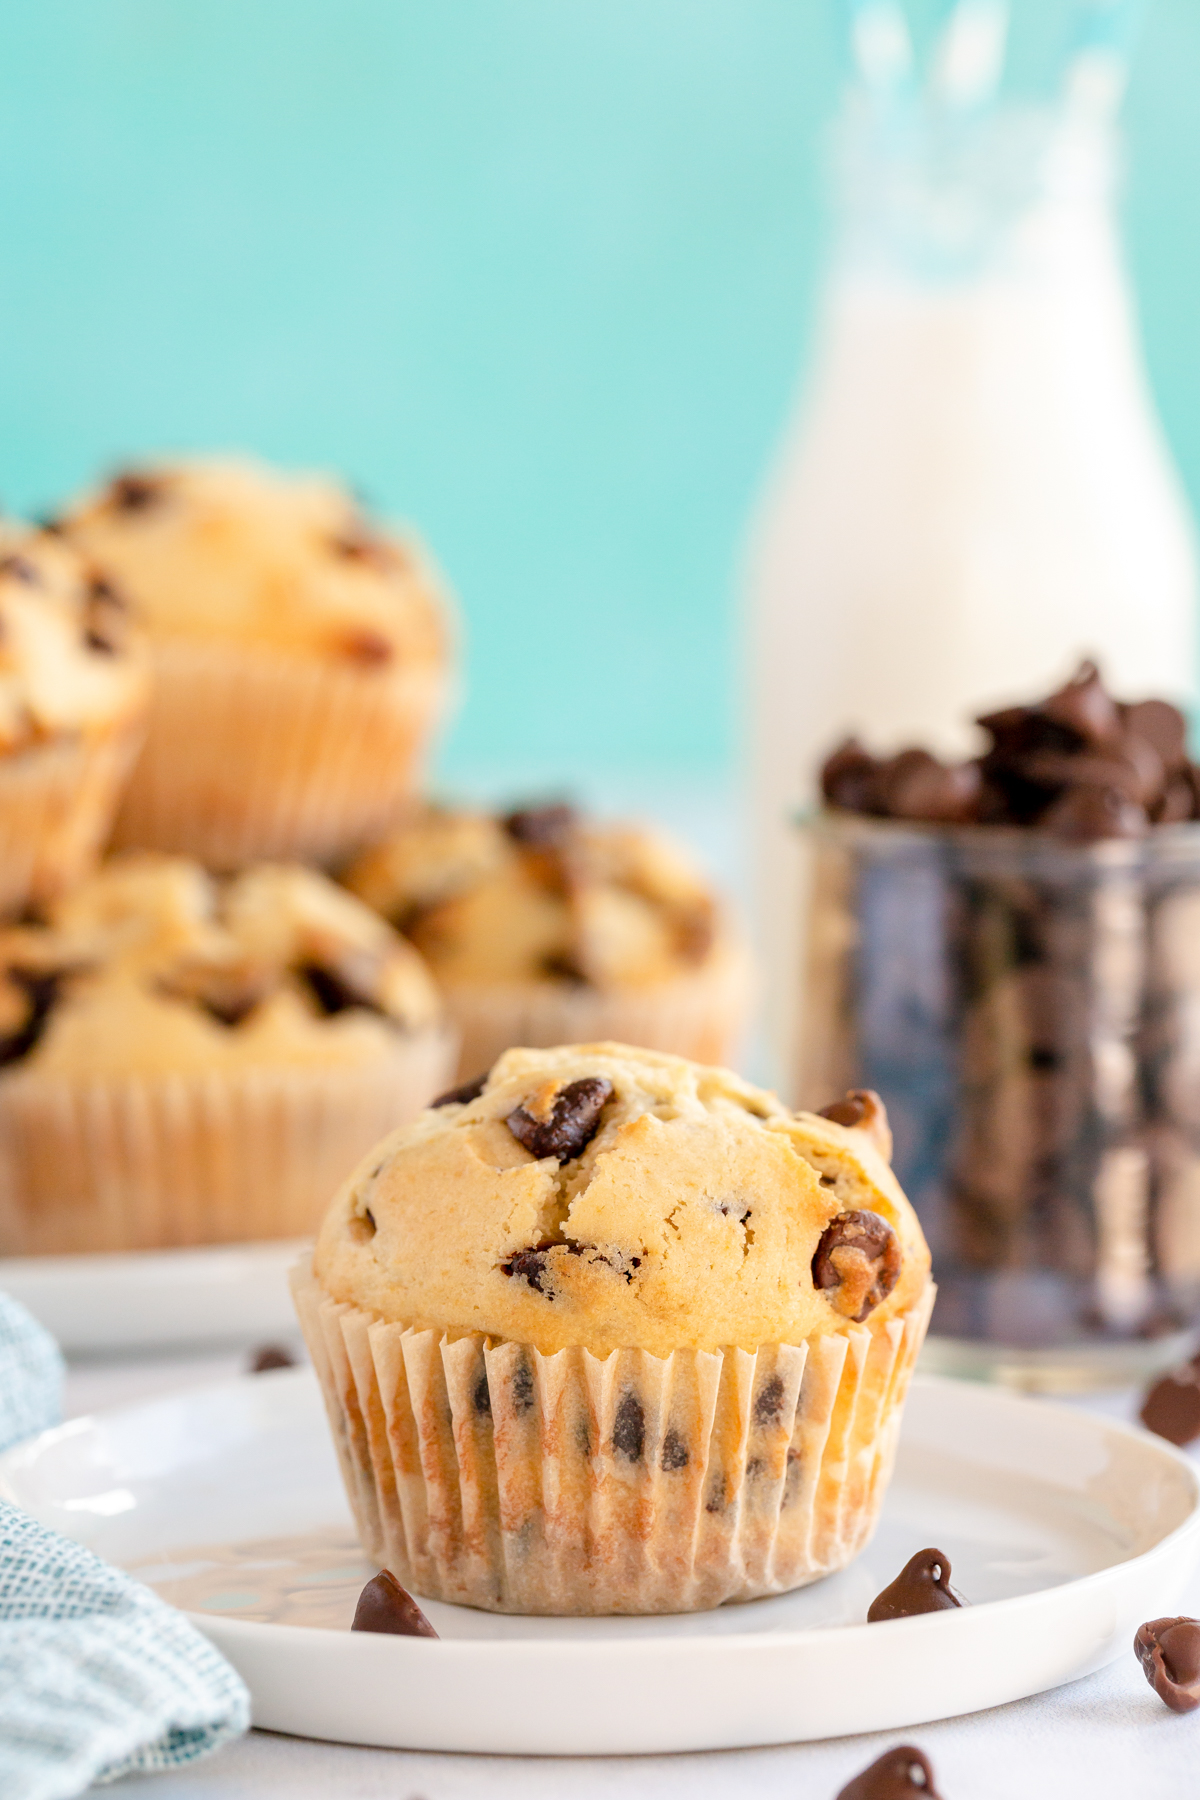 chocolate chip muffins on a white plate